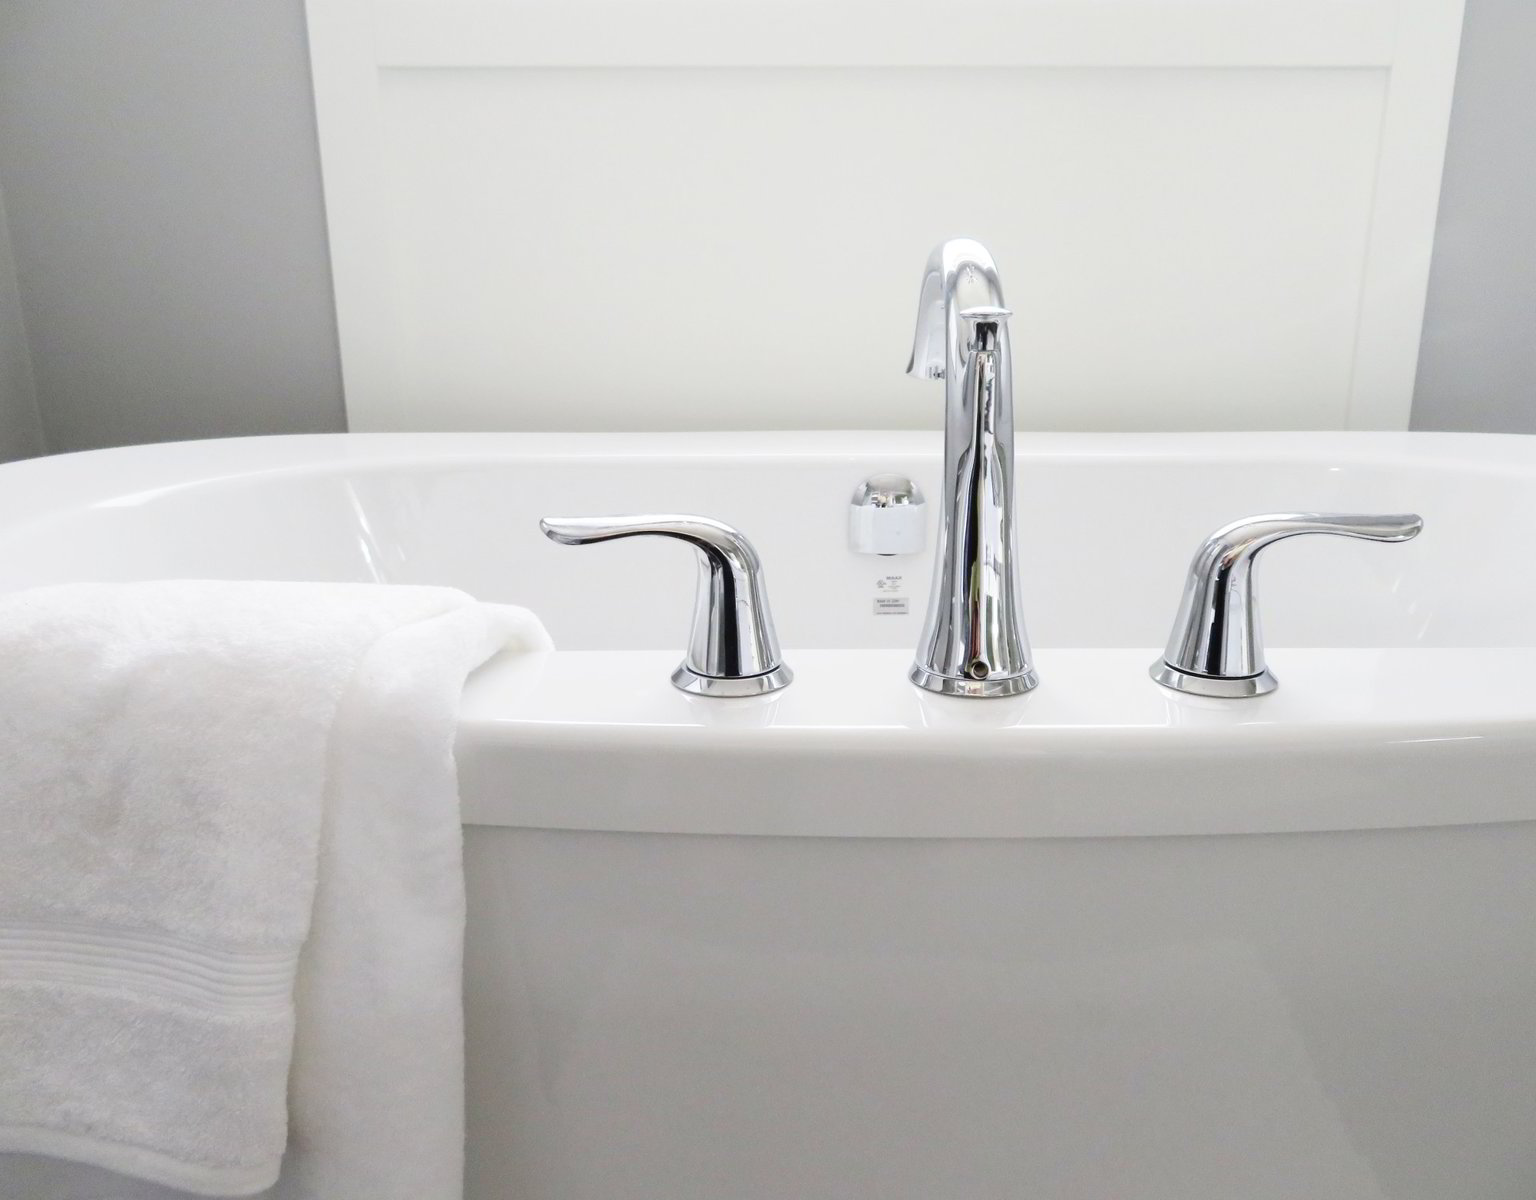 How To Fix A Leaky Bathtub Faucet, How Do I Fix A Dripping Bathtub Faucet